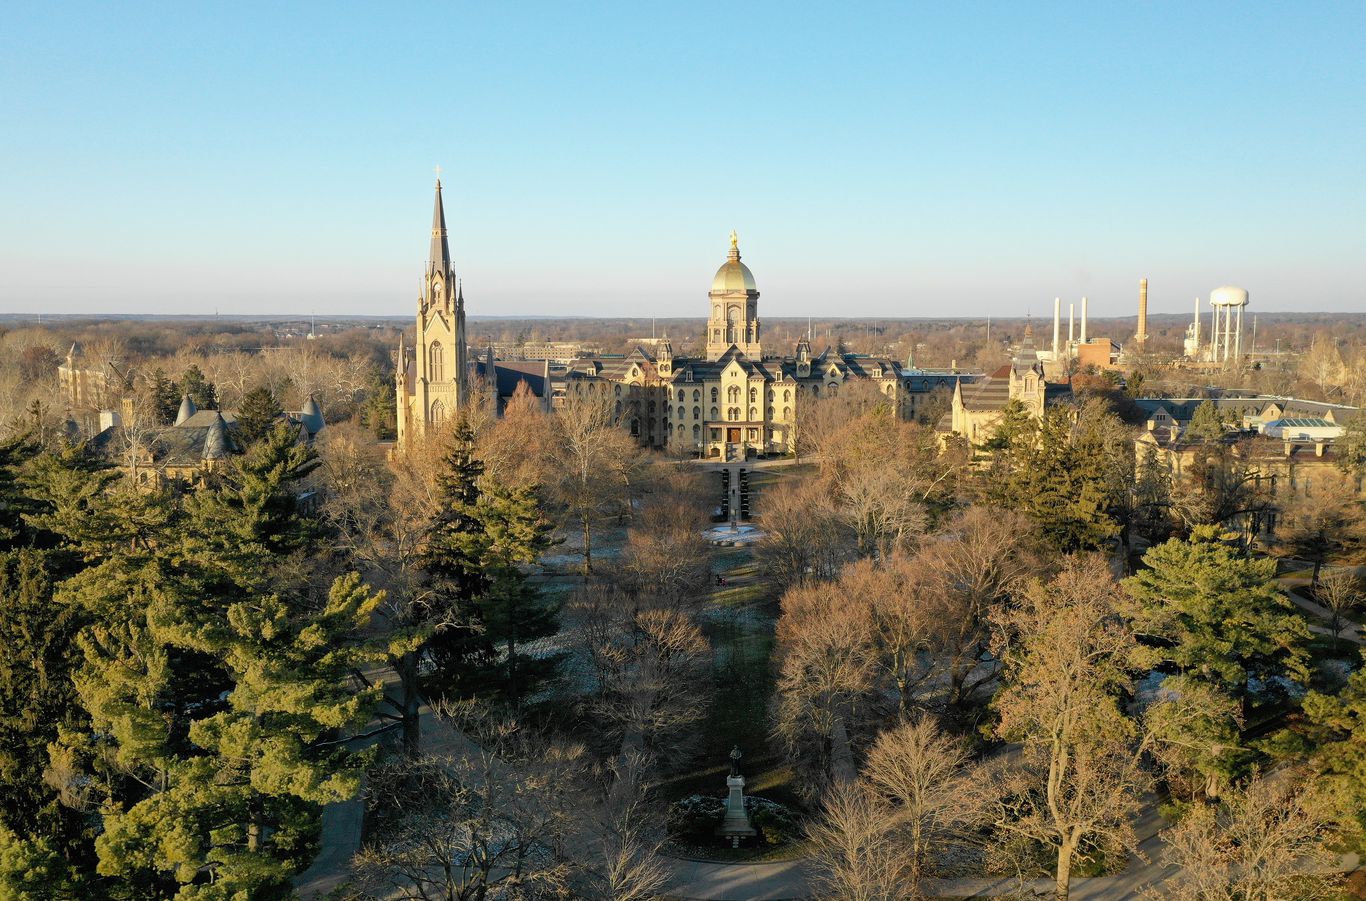 Notre Dame cancels in-person classes after surge of COVID-19 cases